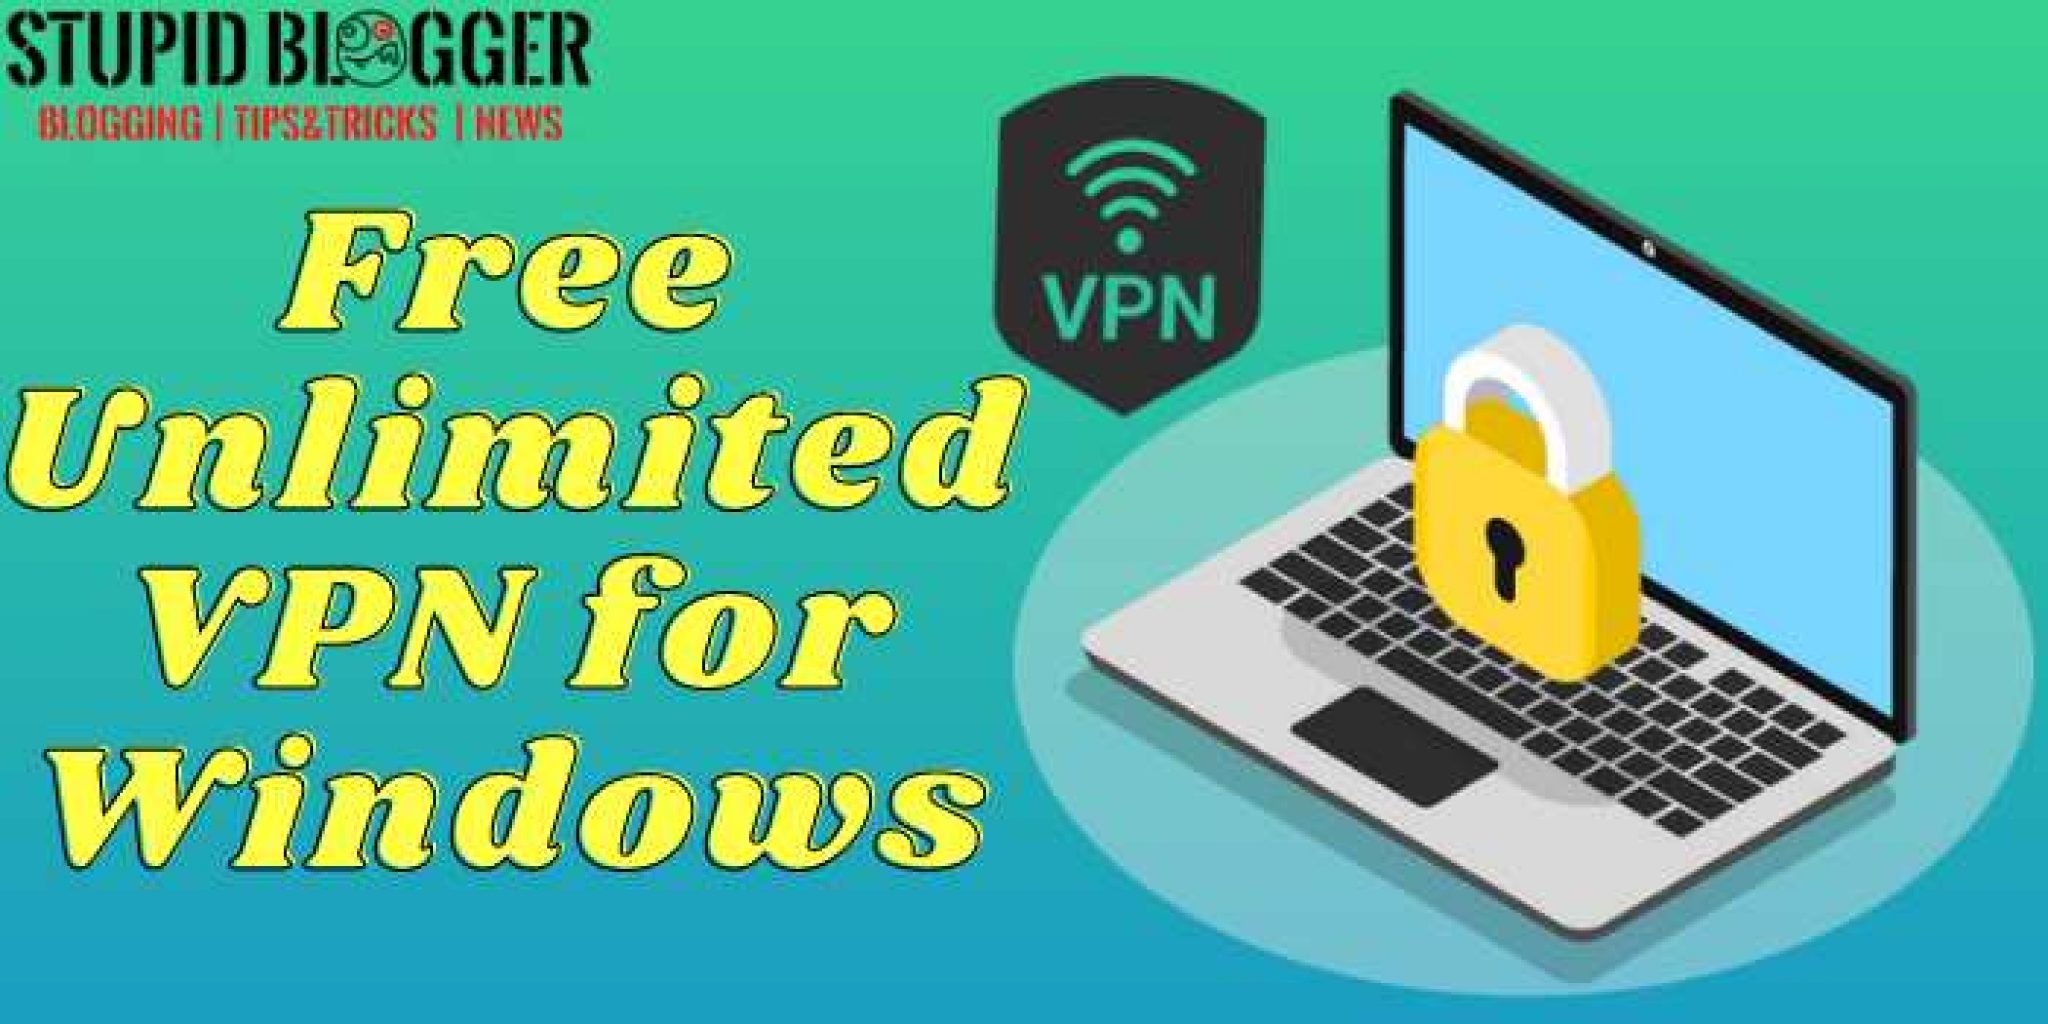 vpn unlimited free download for windows 10